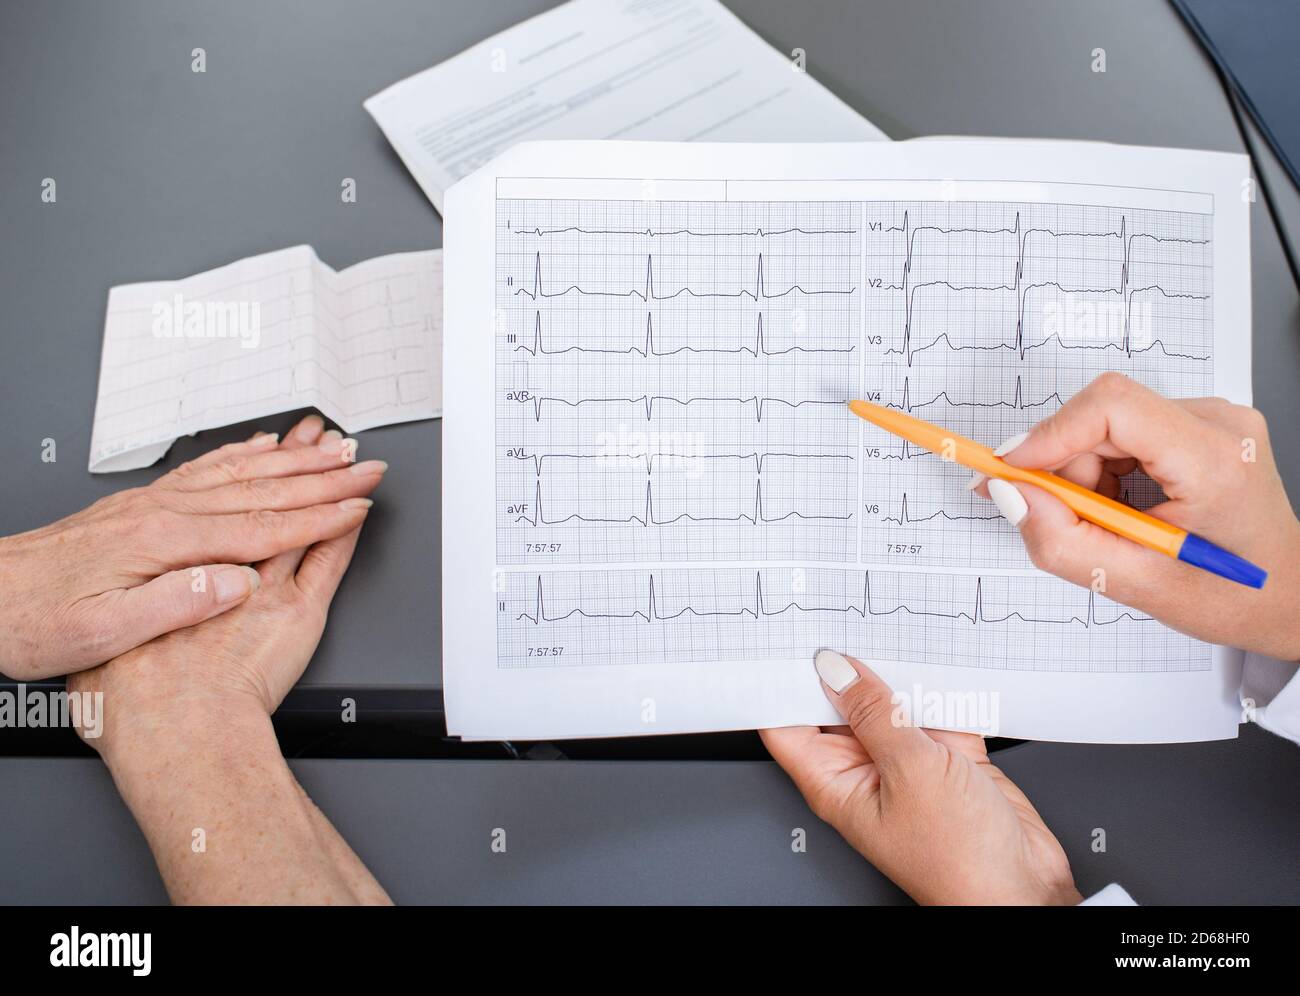 Experienced doctor holding electrocardiogram results of an elderly woman. Diagnostics and treatment of arrhythmias, coronary heart disease and heart f Stock Photo